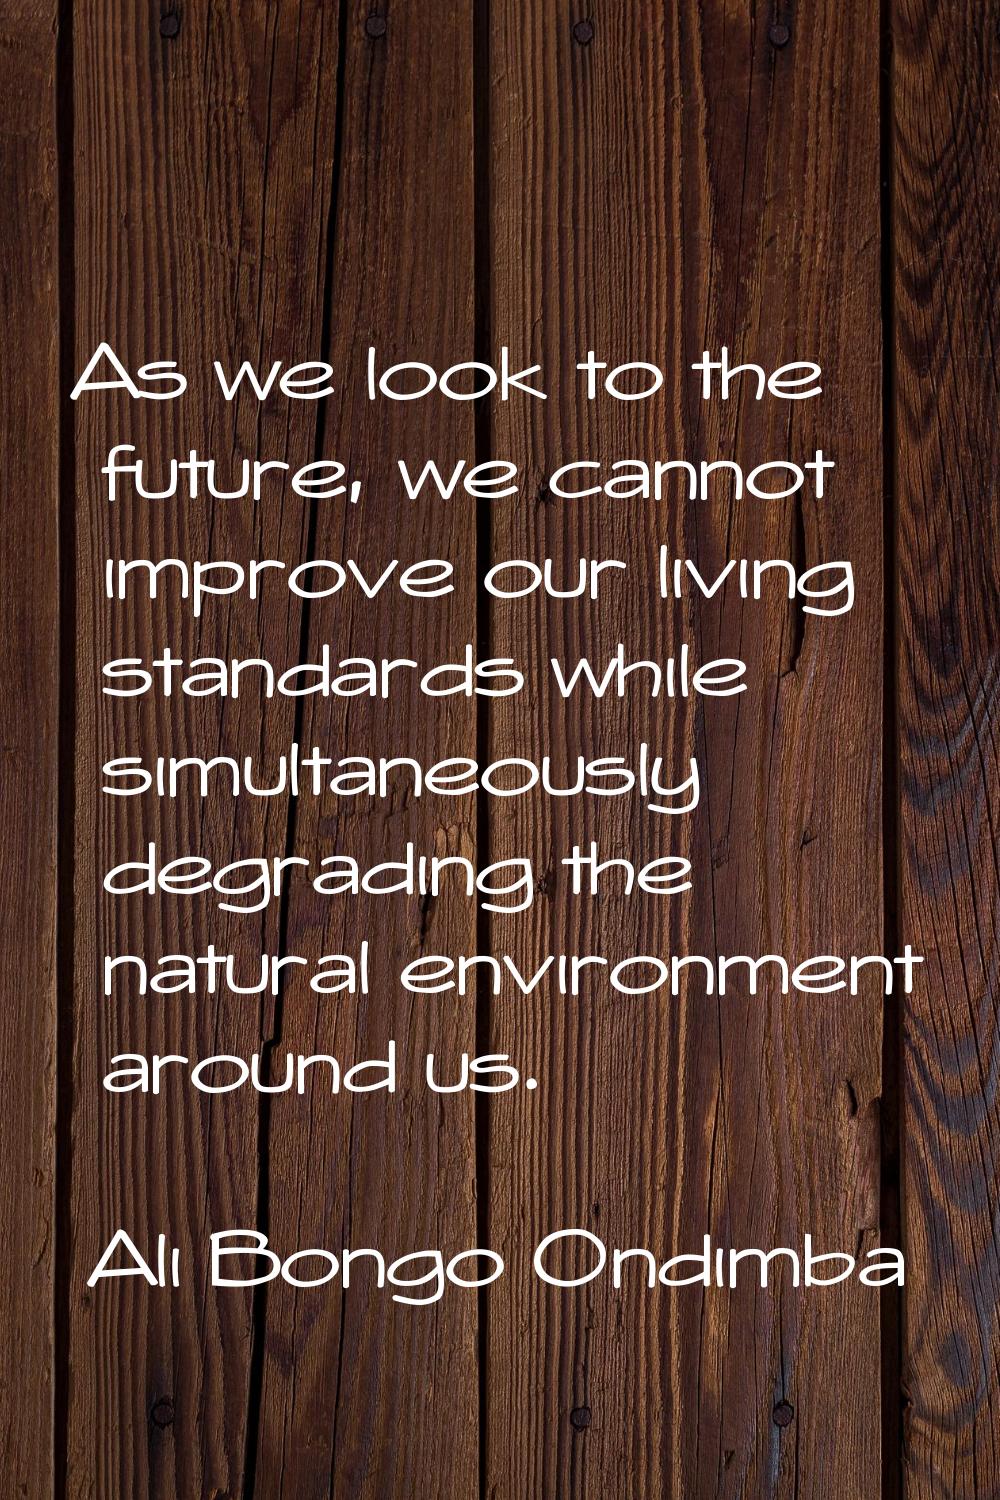 As we look to the future, we cannot improve our living standards while simultaneously degrading the